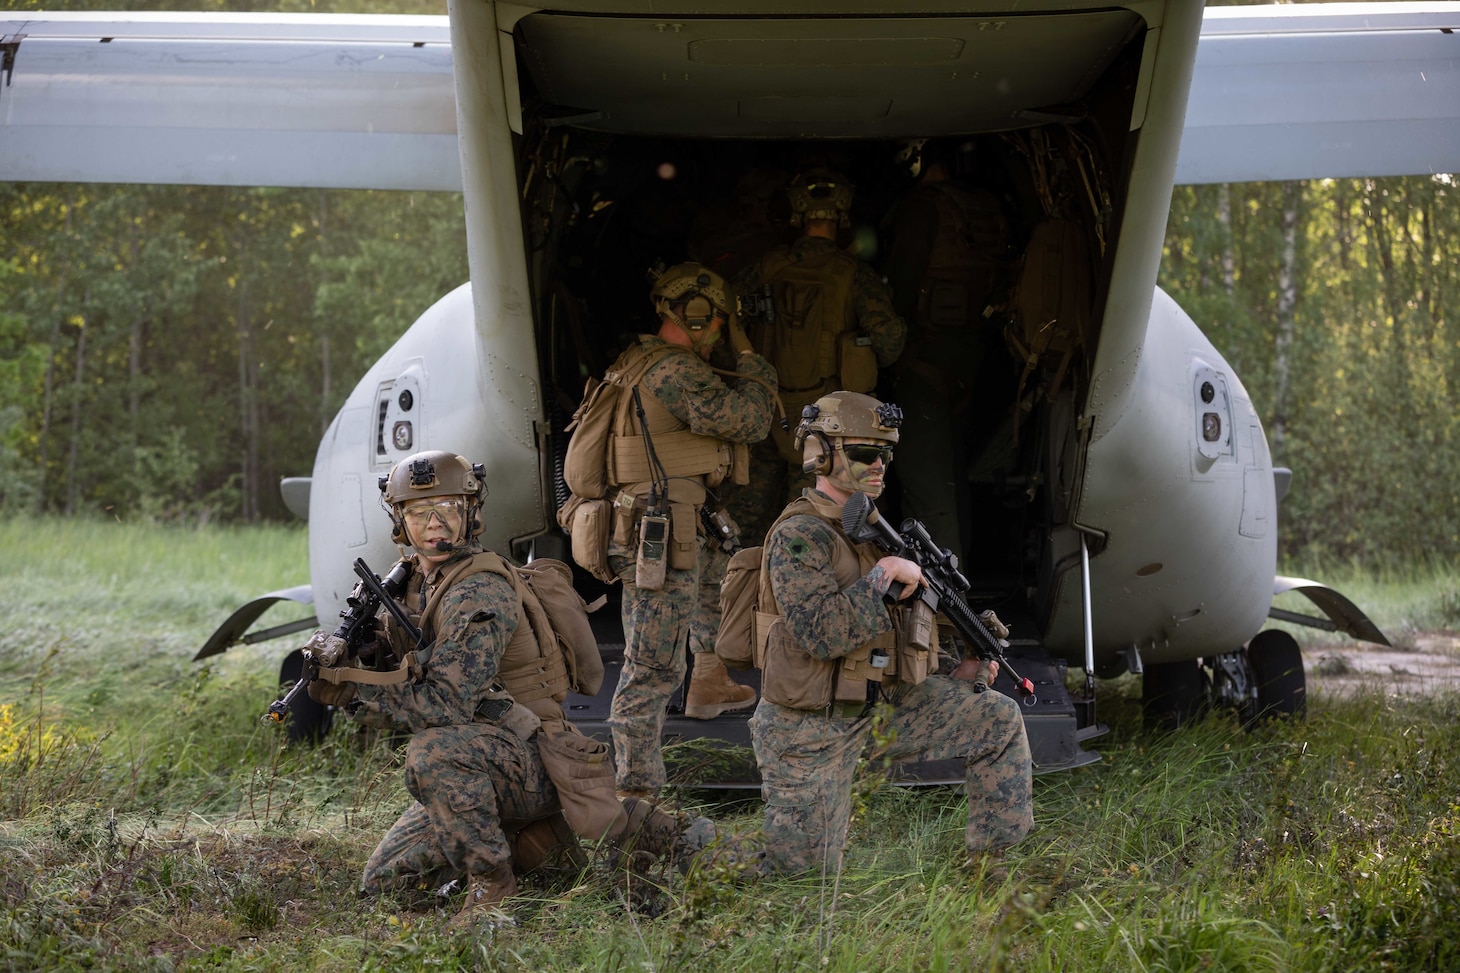 U.S. Marine Corps MV-22 Ospreys, attached to the 22nd Marine Expeditionary Unit, land in Ventspils, Latvia, during exercise BALTOPS 22, June 12, 2022.